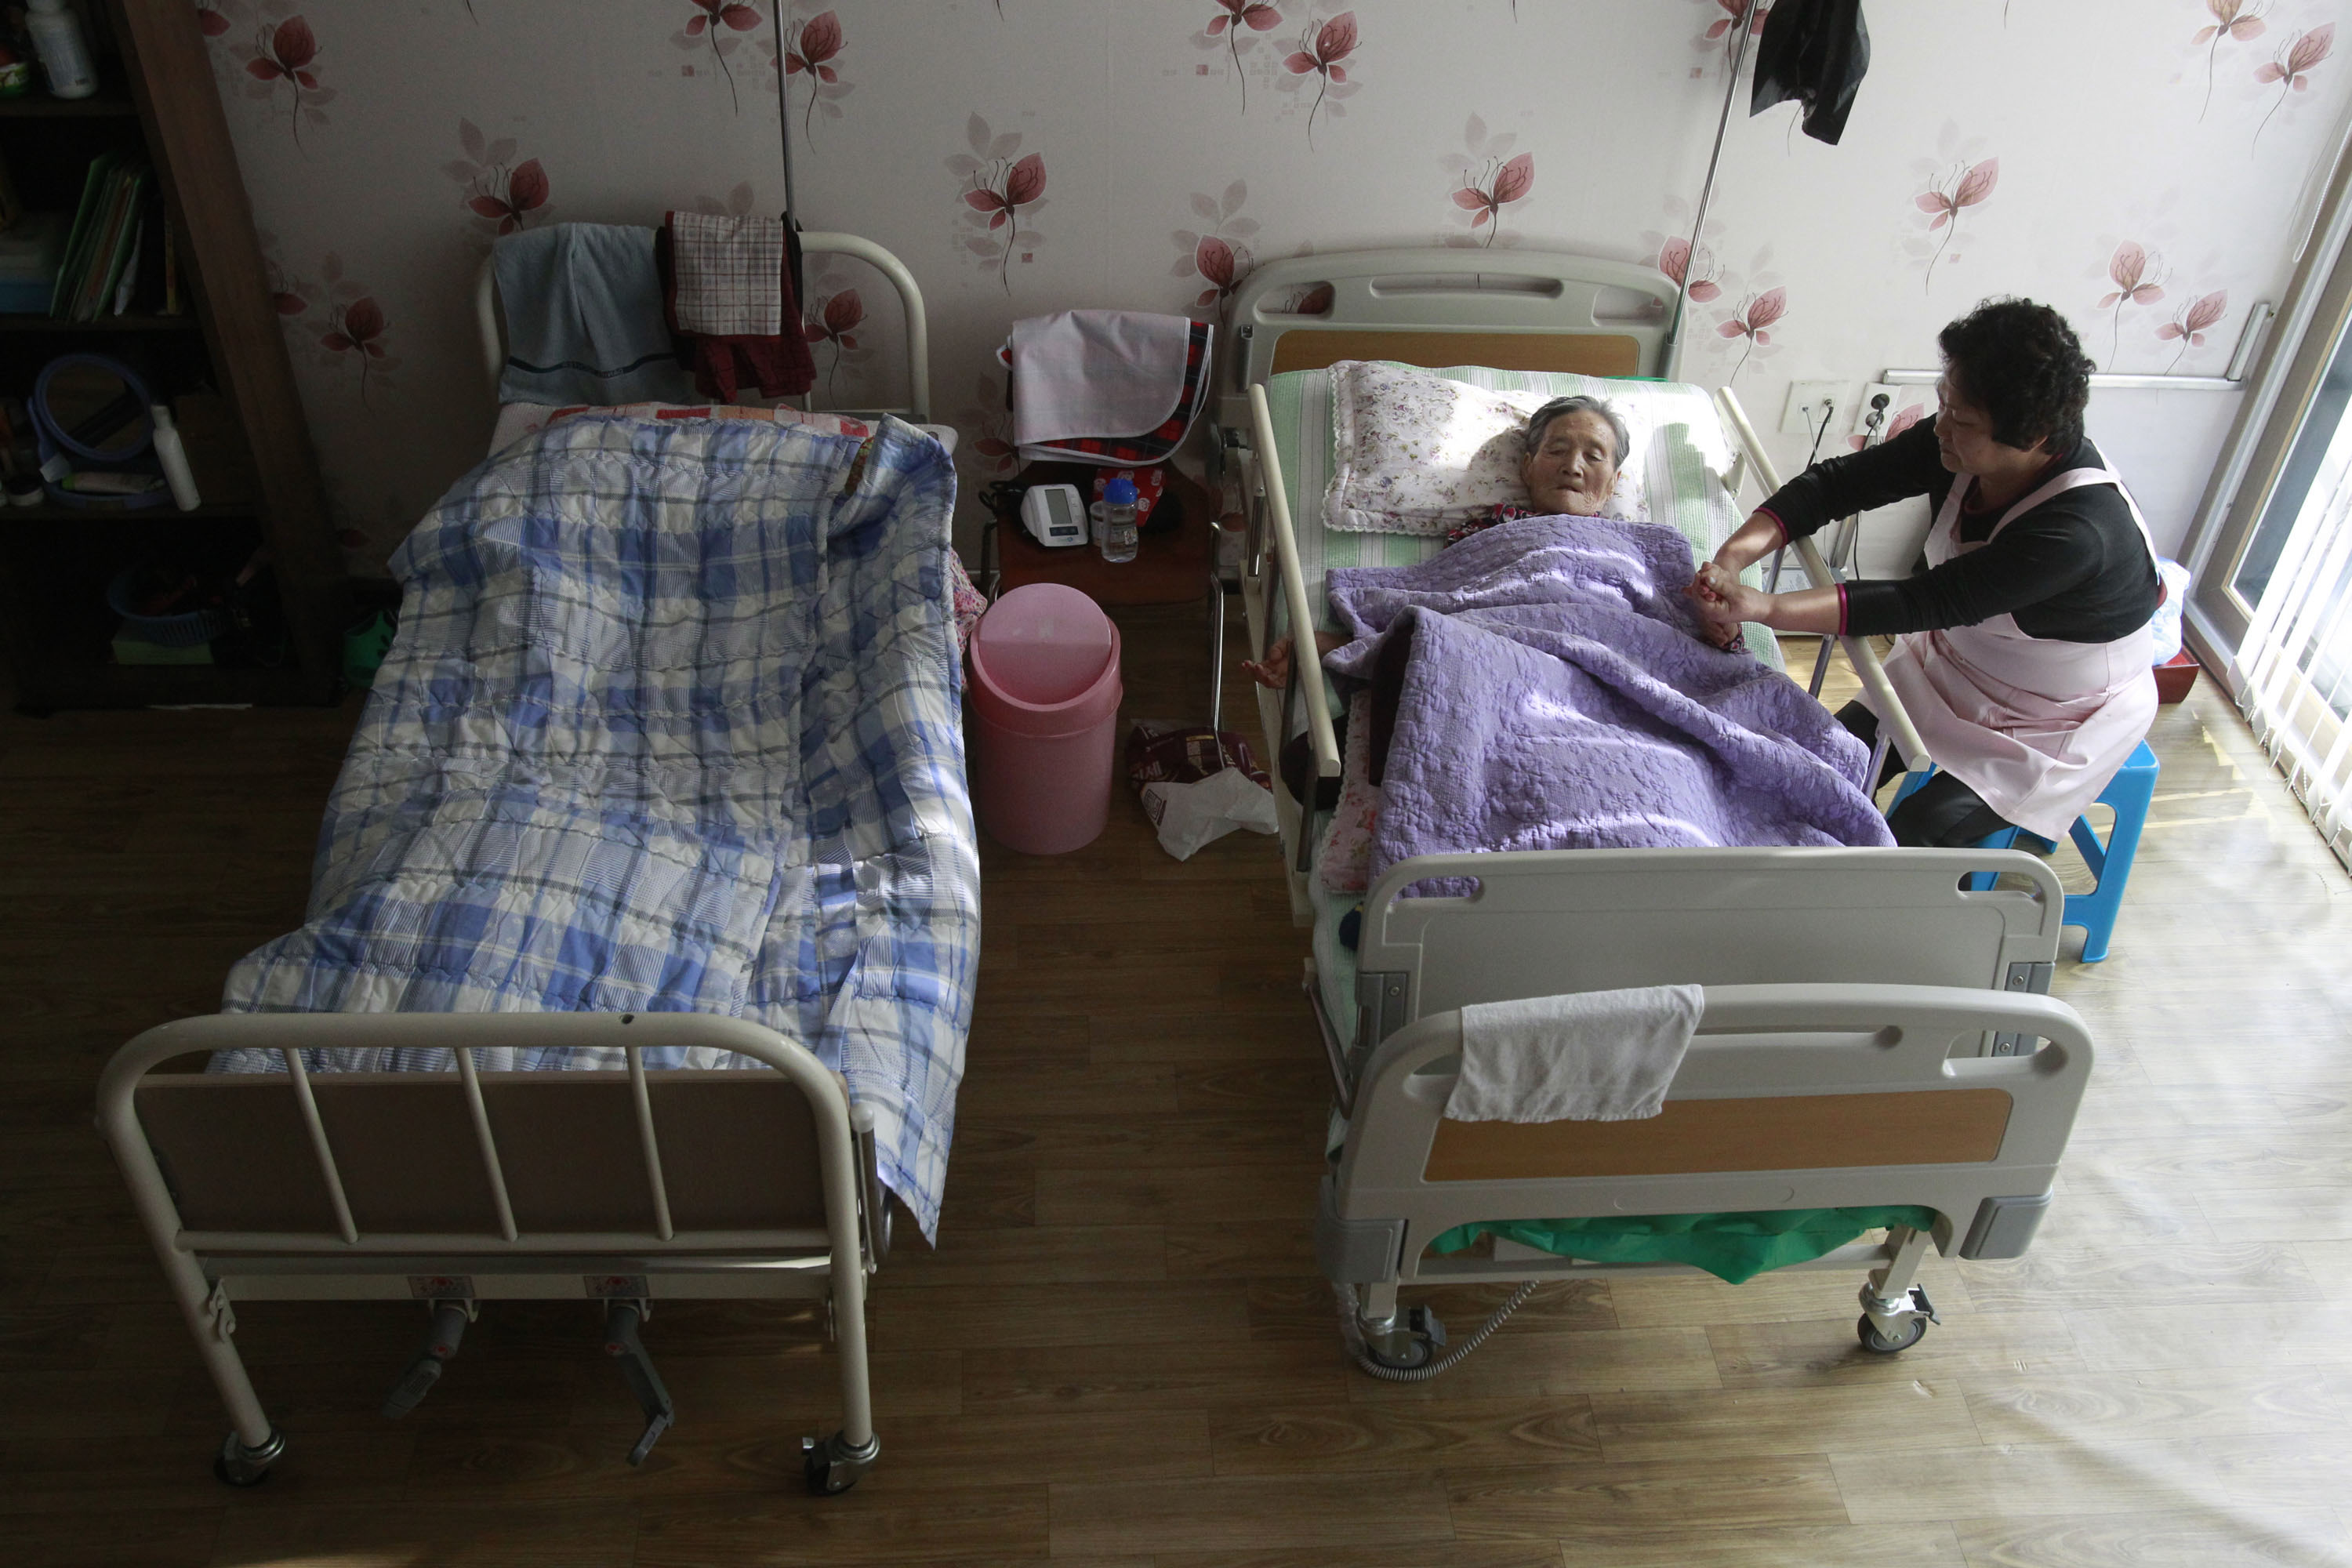 Safe place: Kim Jong-boon receives care at the House of Sharing, a nursing home for former 'comfort women' in Toechon, South Korea, last year. | AP